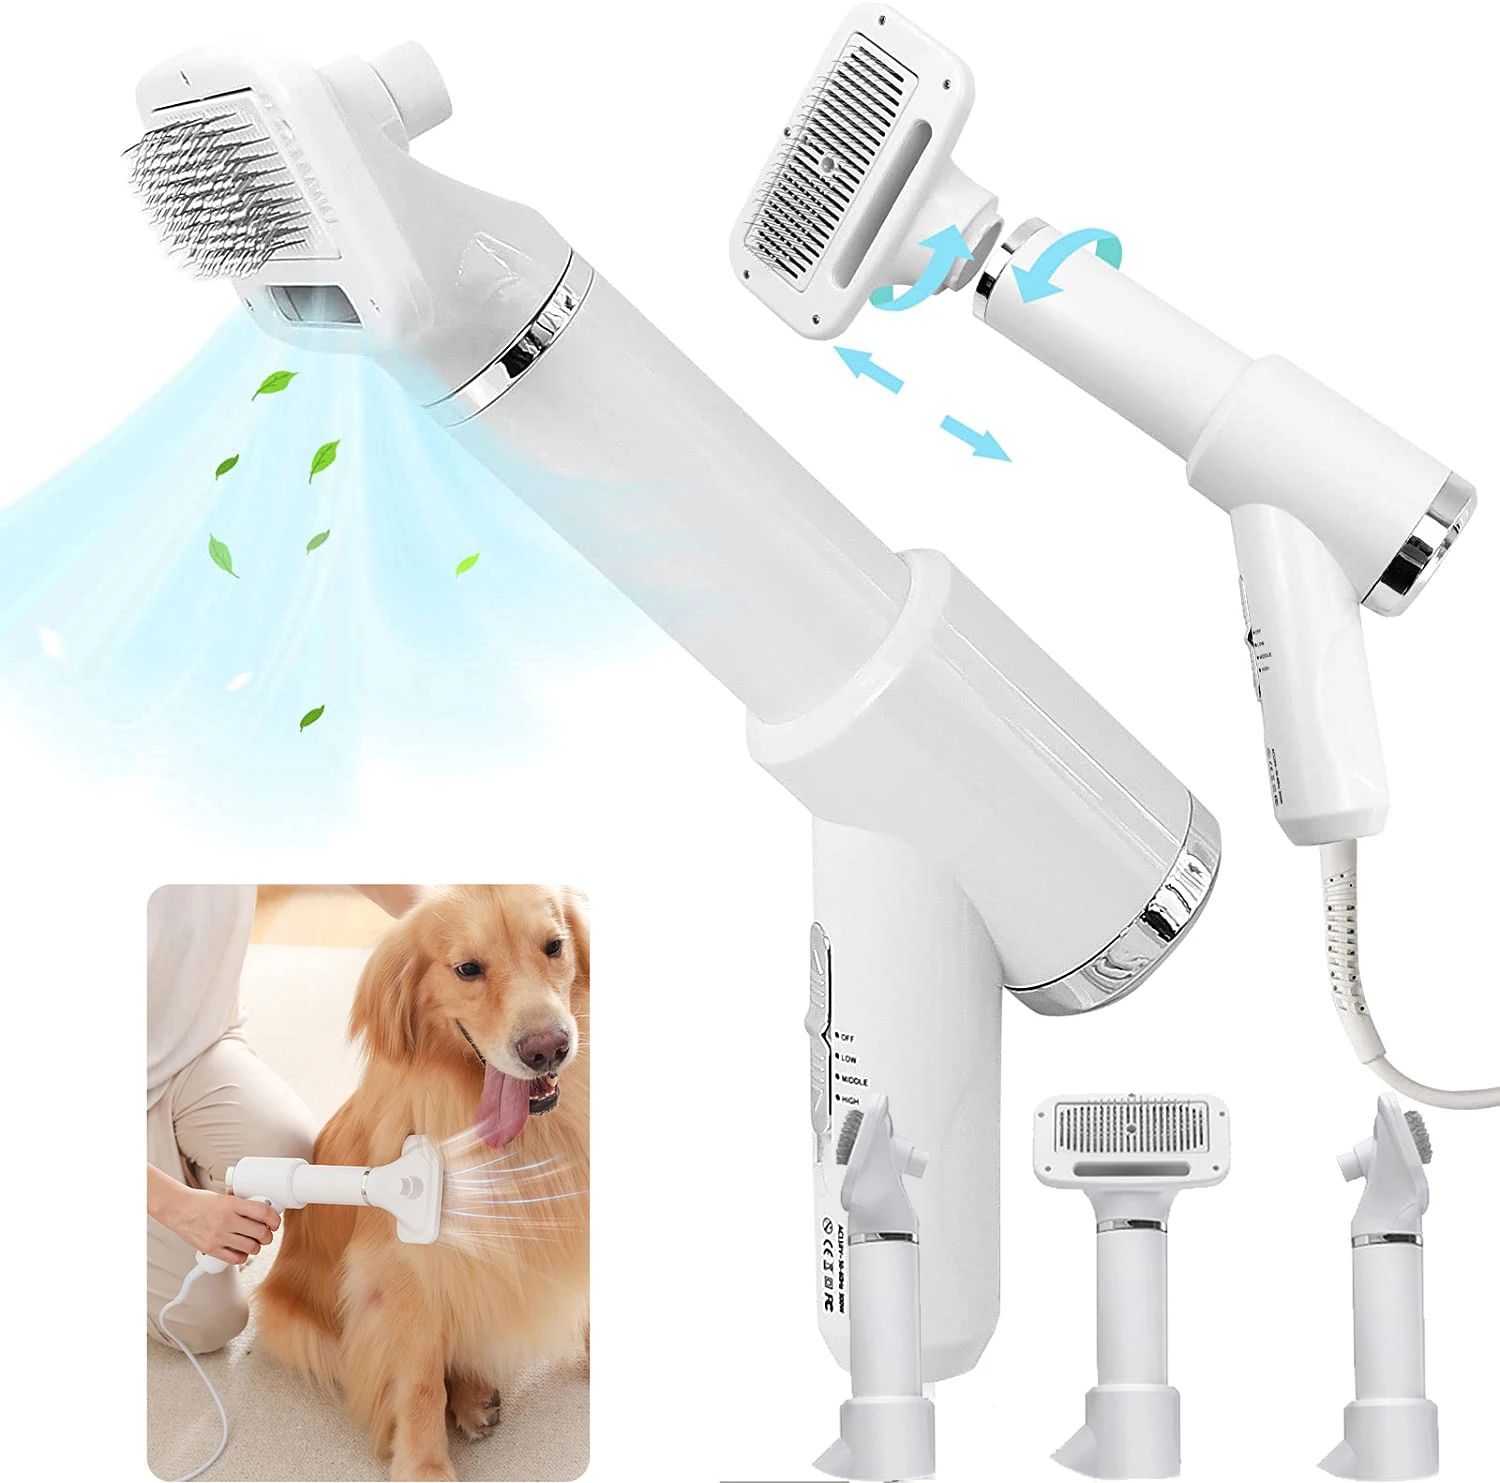 

Dog Hair Dryer Brush Pet Grooming Hair Dryer with Slicker Brush One-Key Hair Removal Dog Blow Dryer for Small Medium Dogs Cats